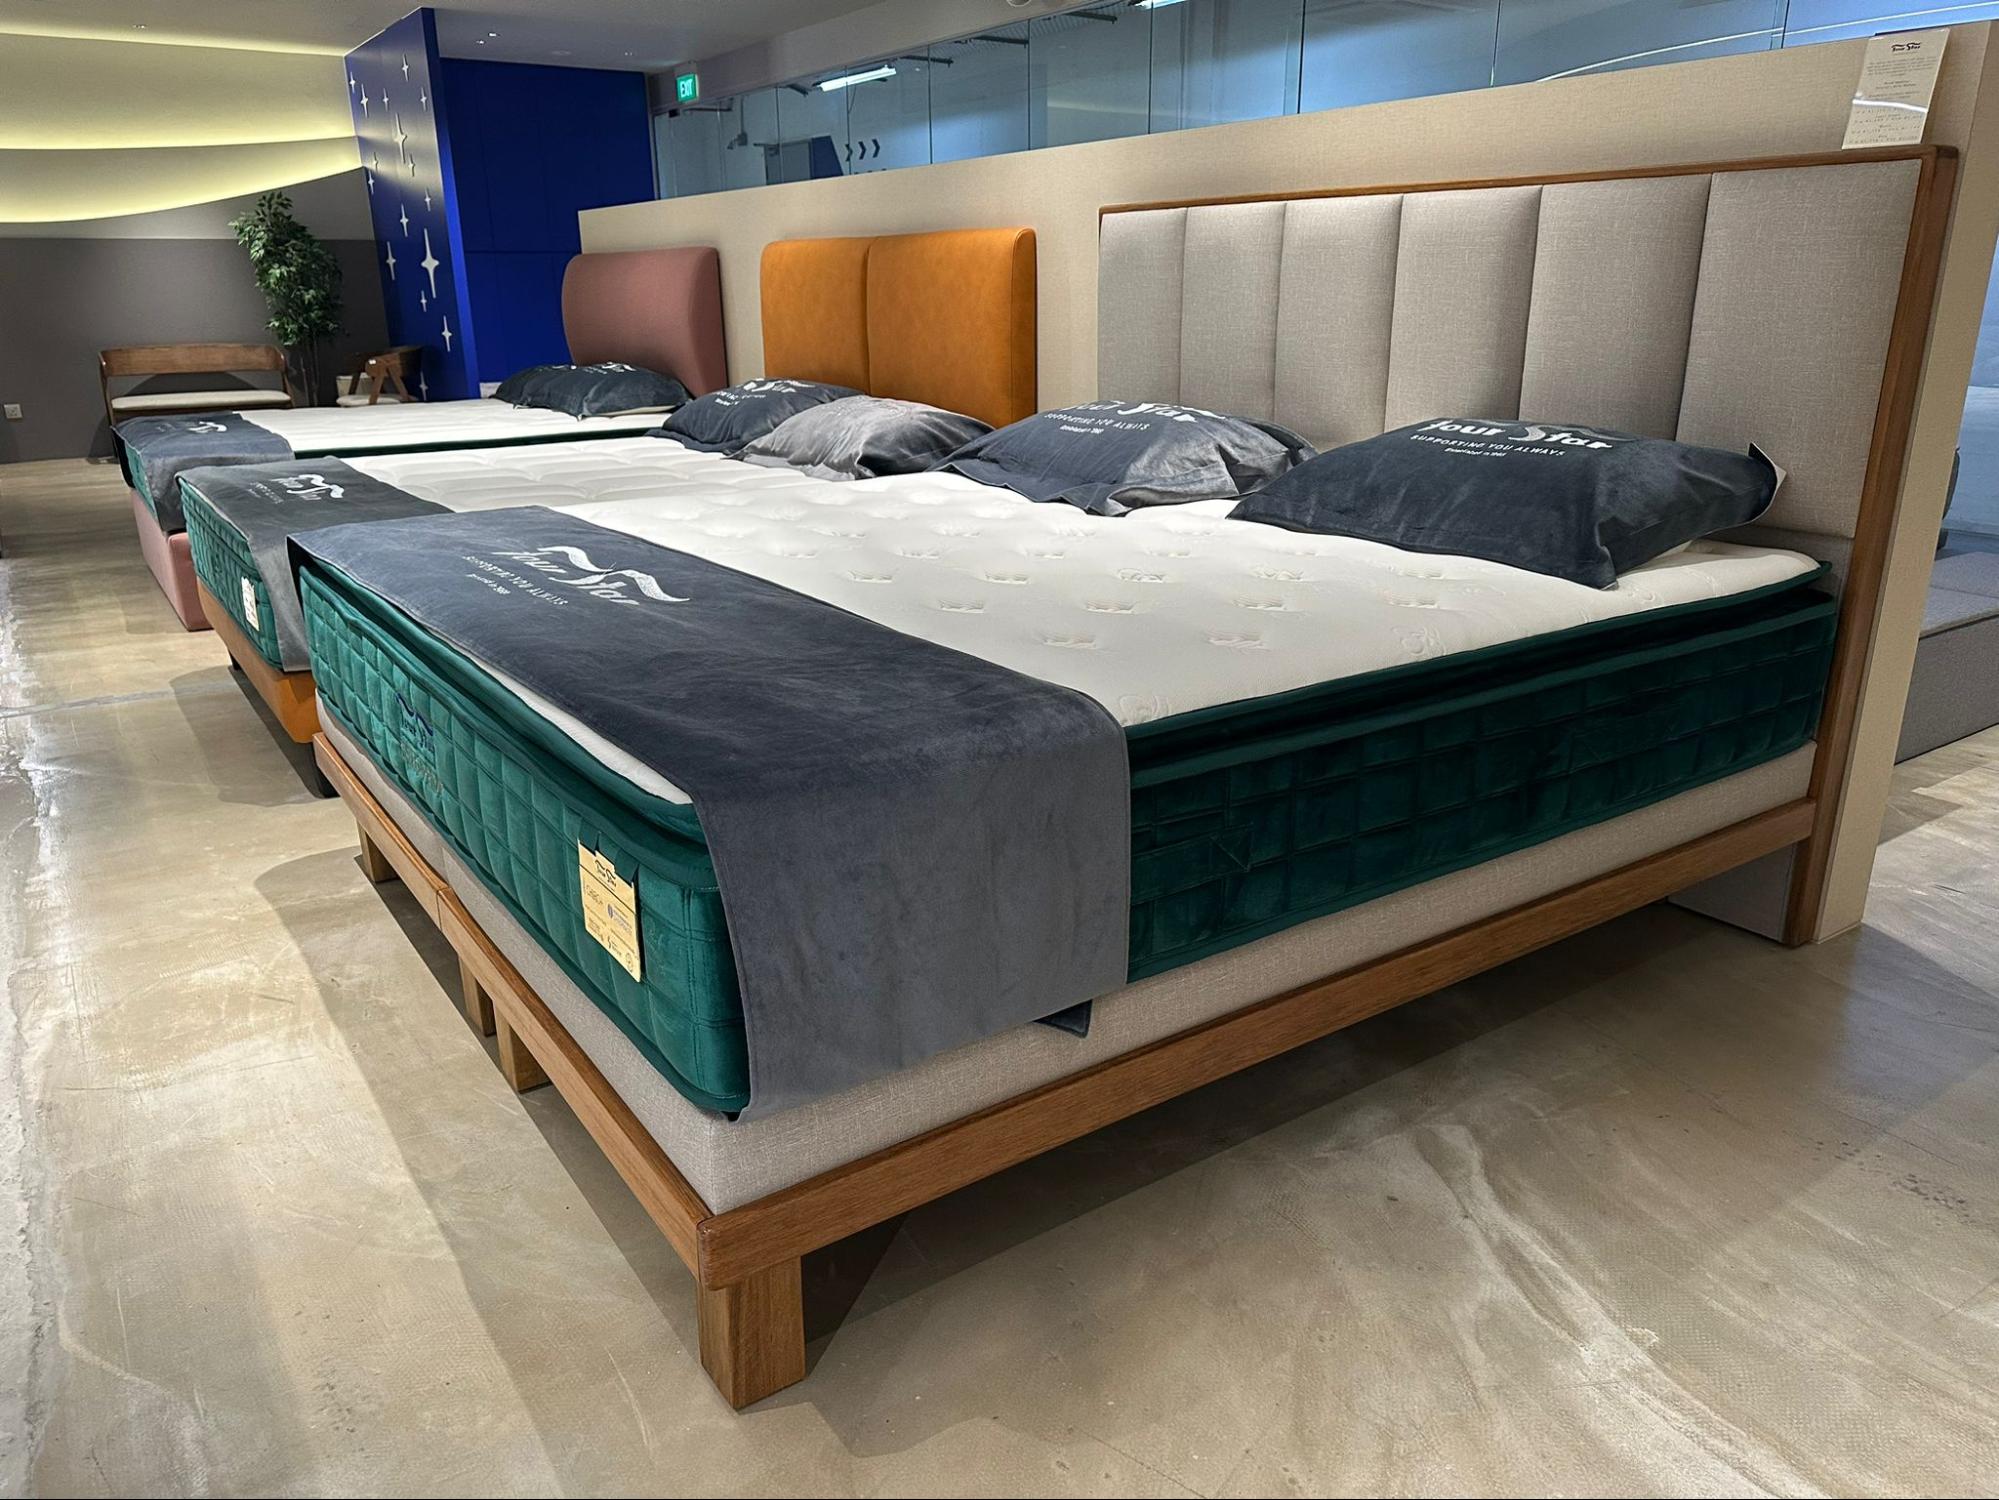 Up to 85% off beds & more at Four Star’s annual Black Friday sale from ...